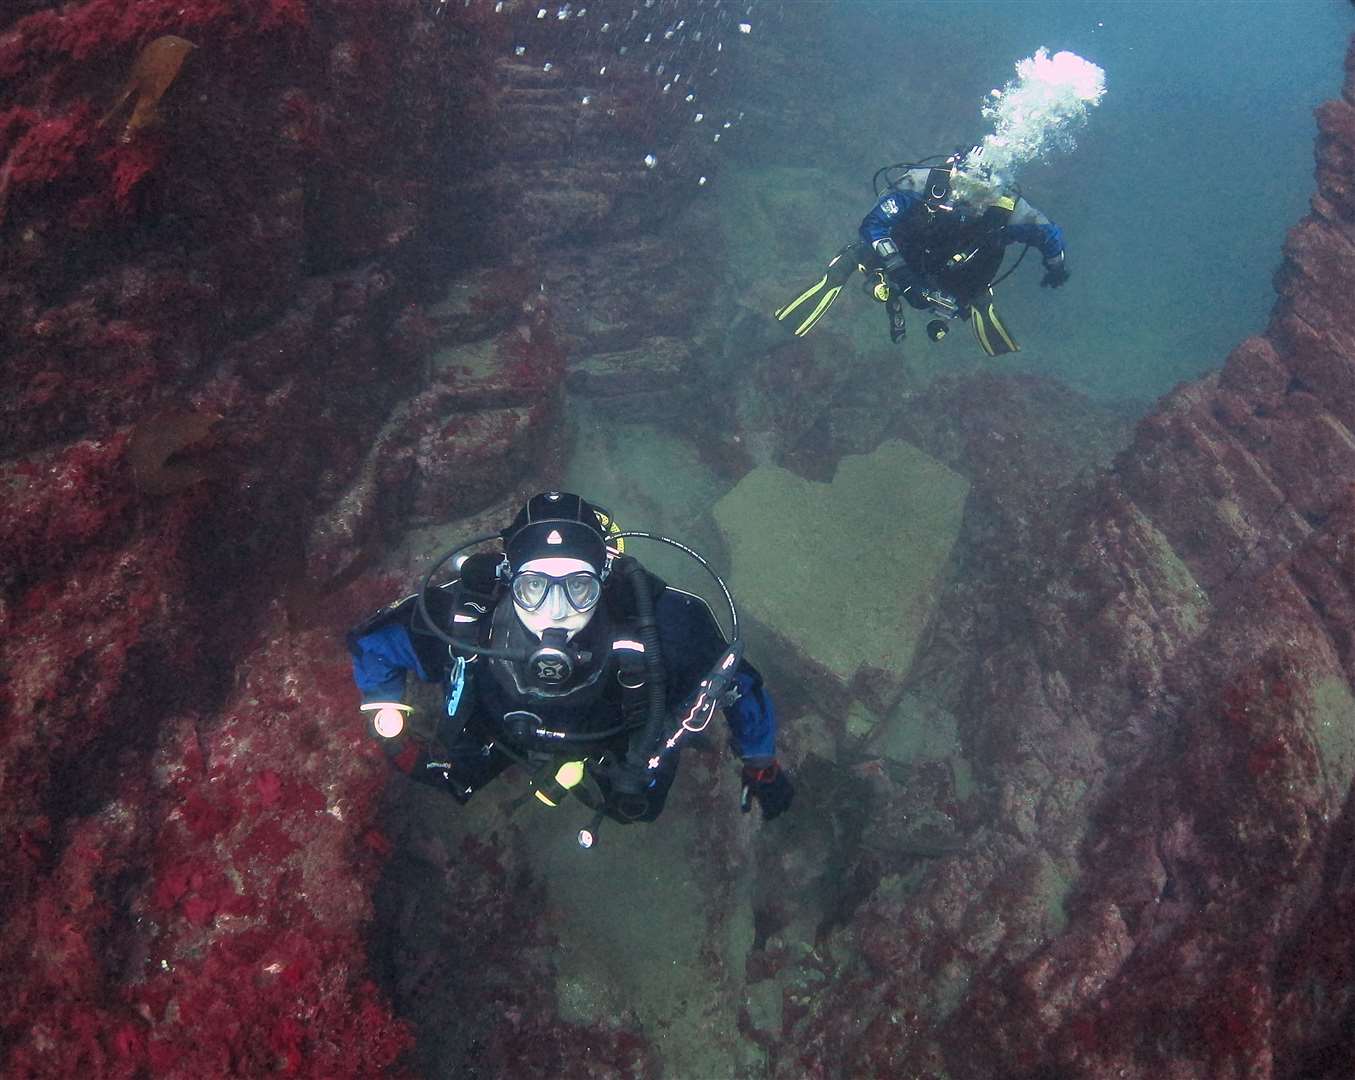 Divers in Geo of Sclaites, Duncansby Head.